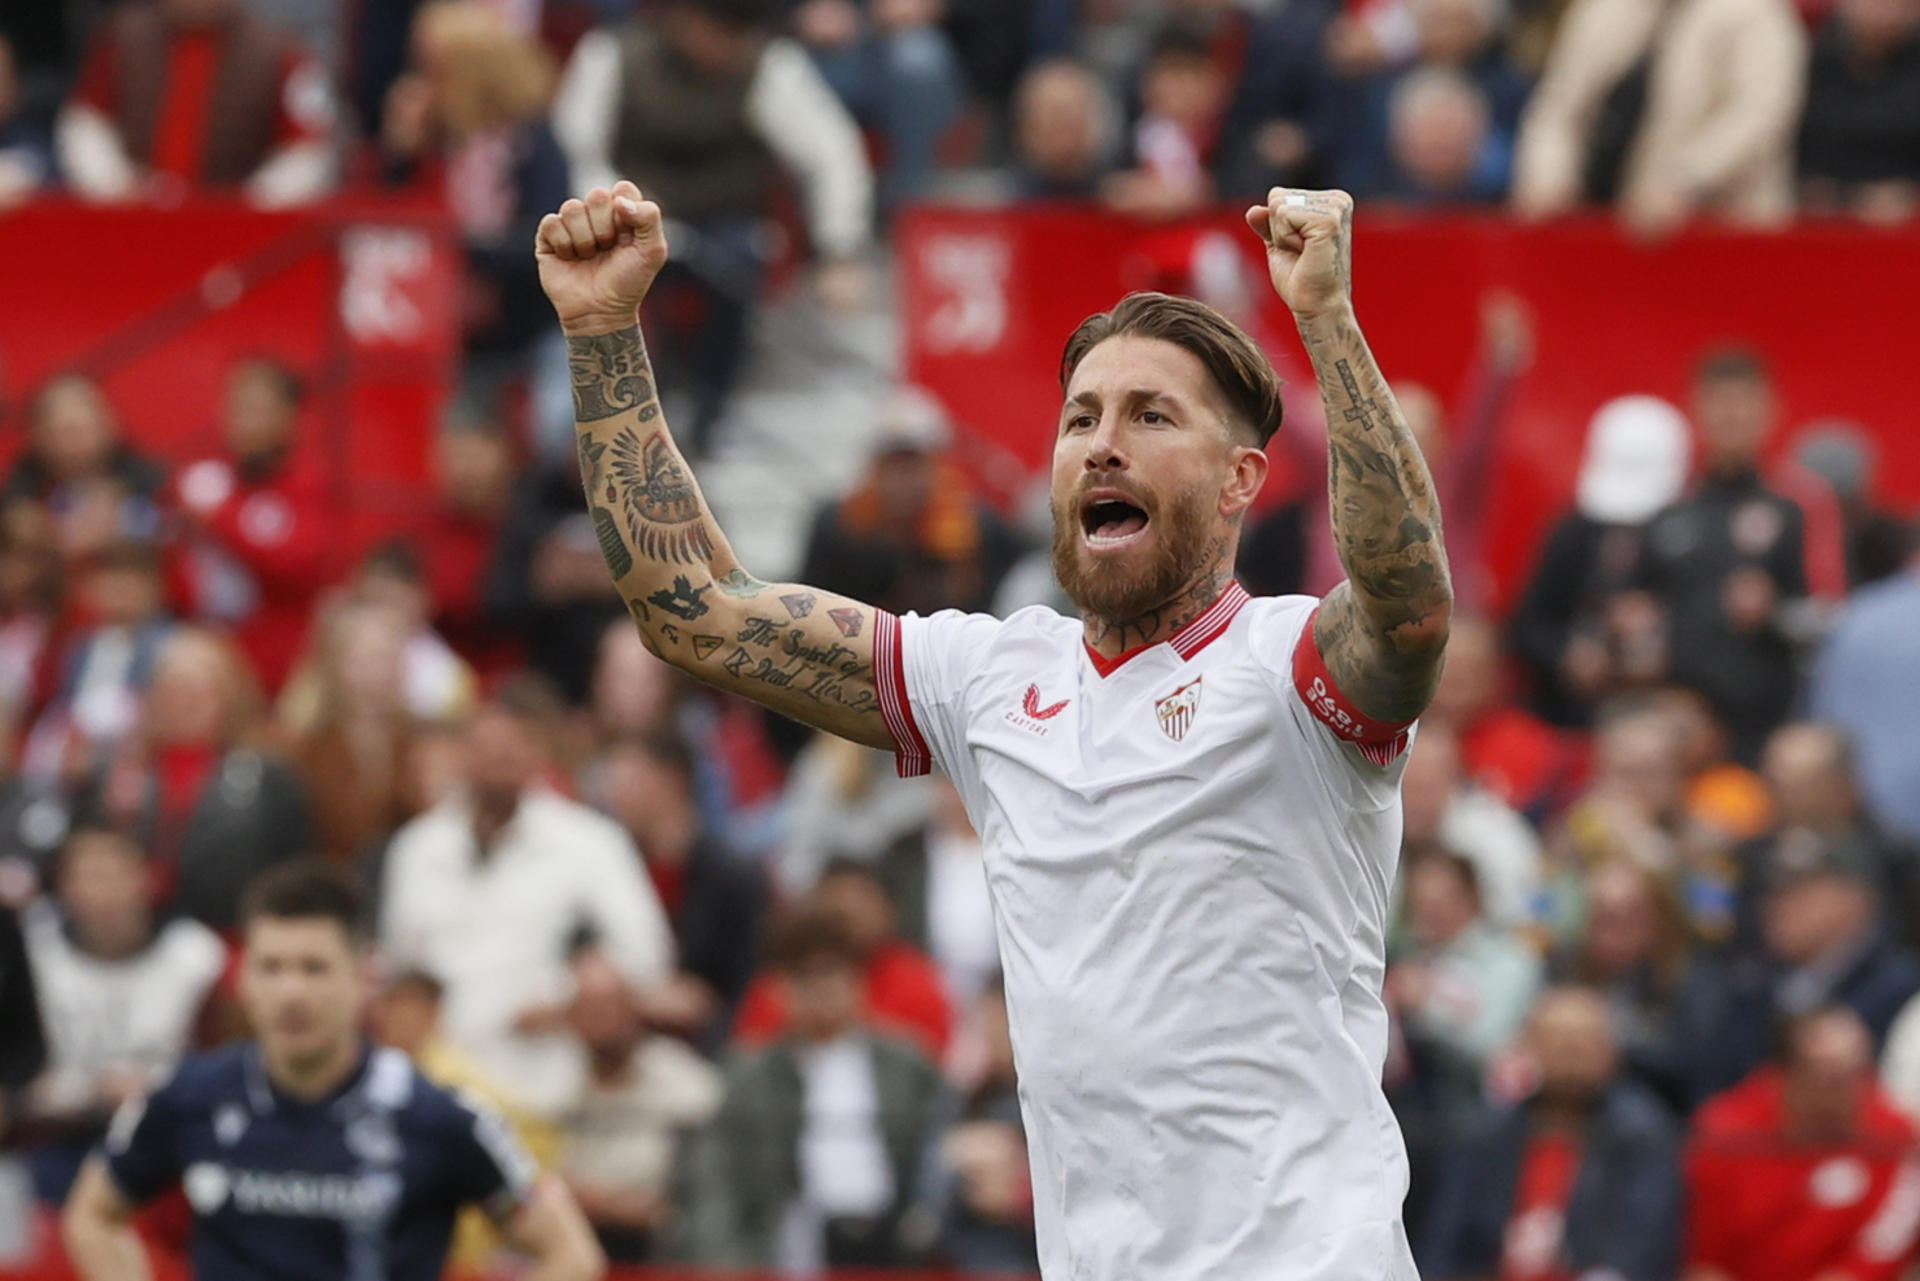 Ramos: "I want a team to go to war with"